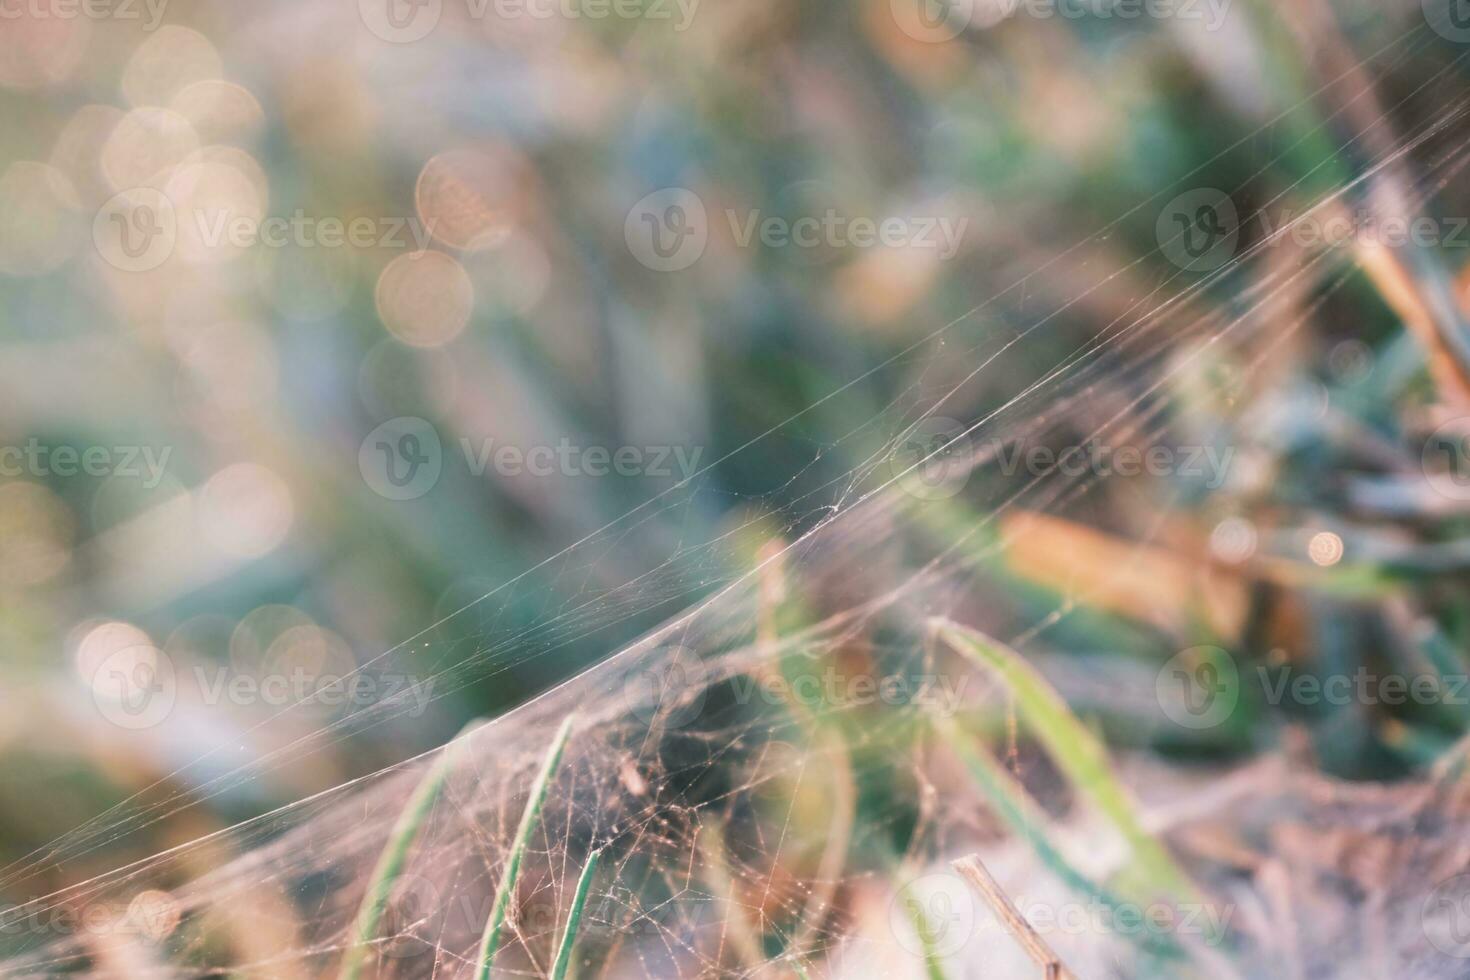 Spider web on grass leaves in sunlight morning with bokeh beautiful background photo